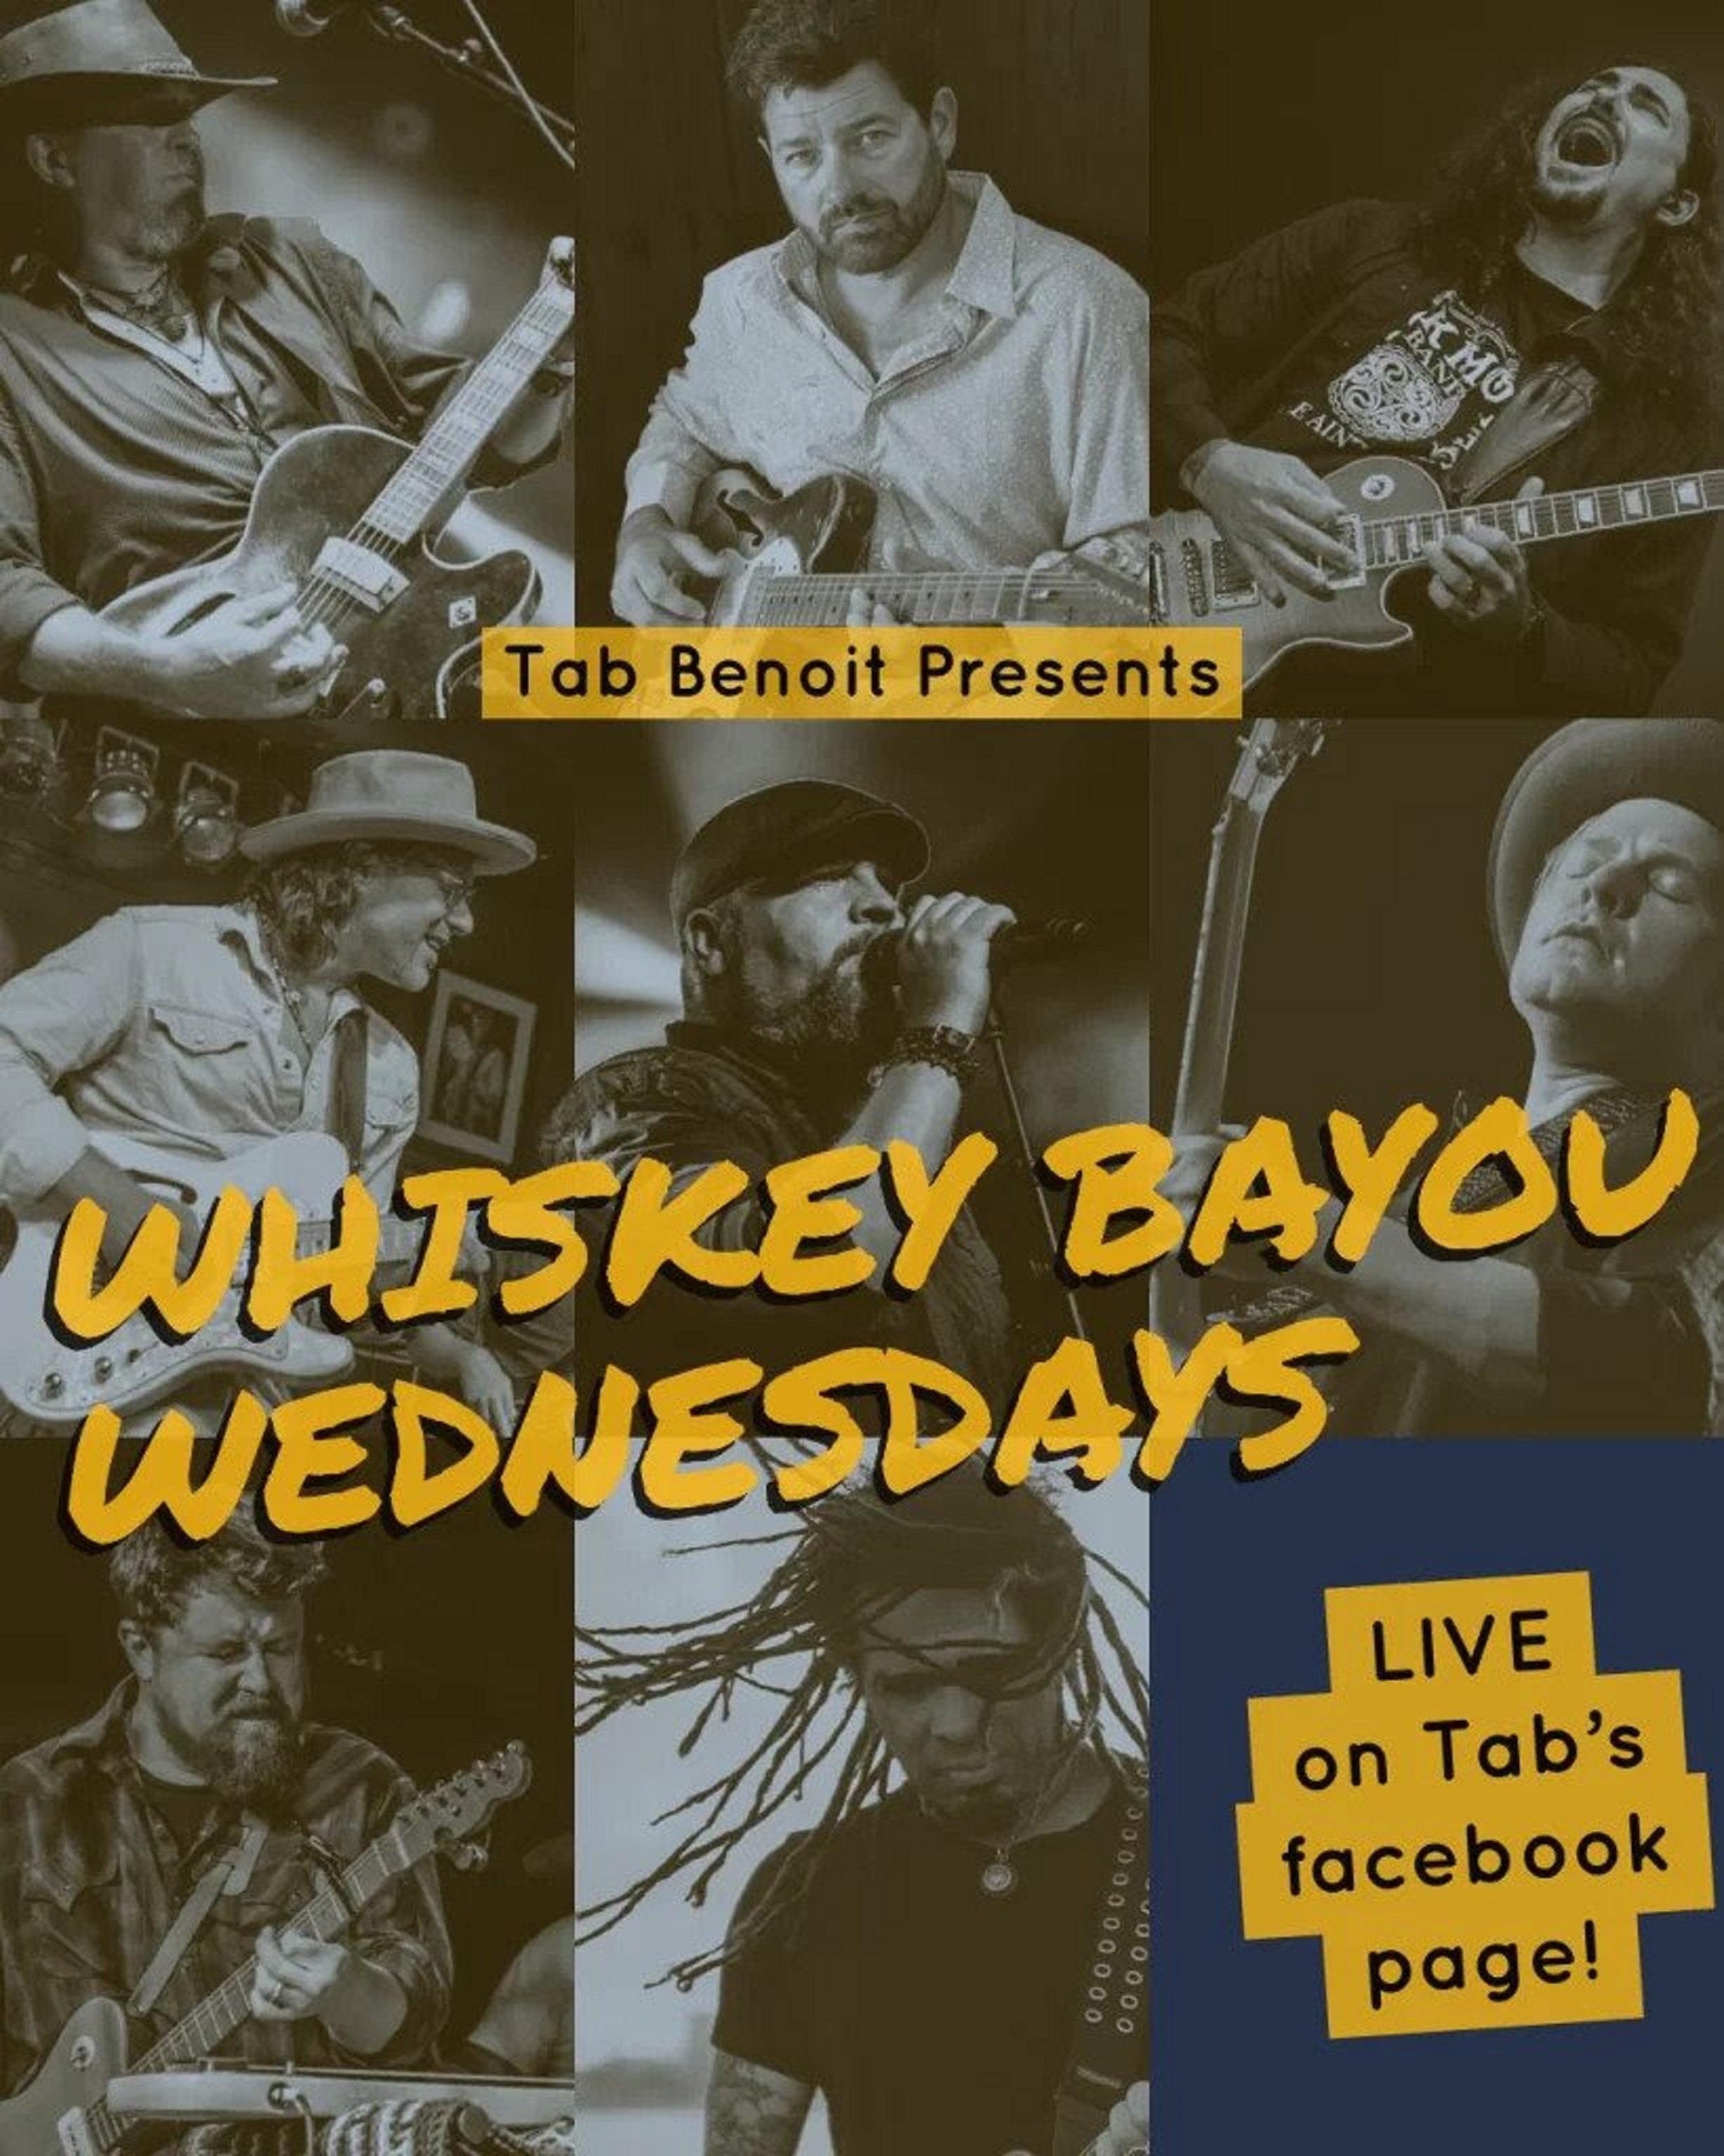 Tab Benoit Presents 'Whiskey Bayou Wednesdays' Live Steaming Concerts